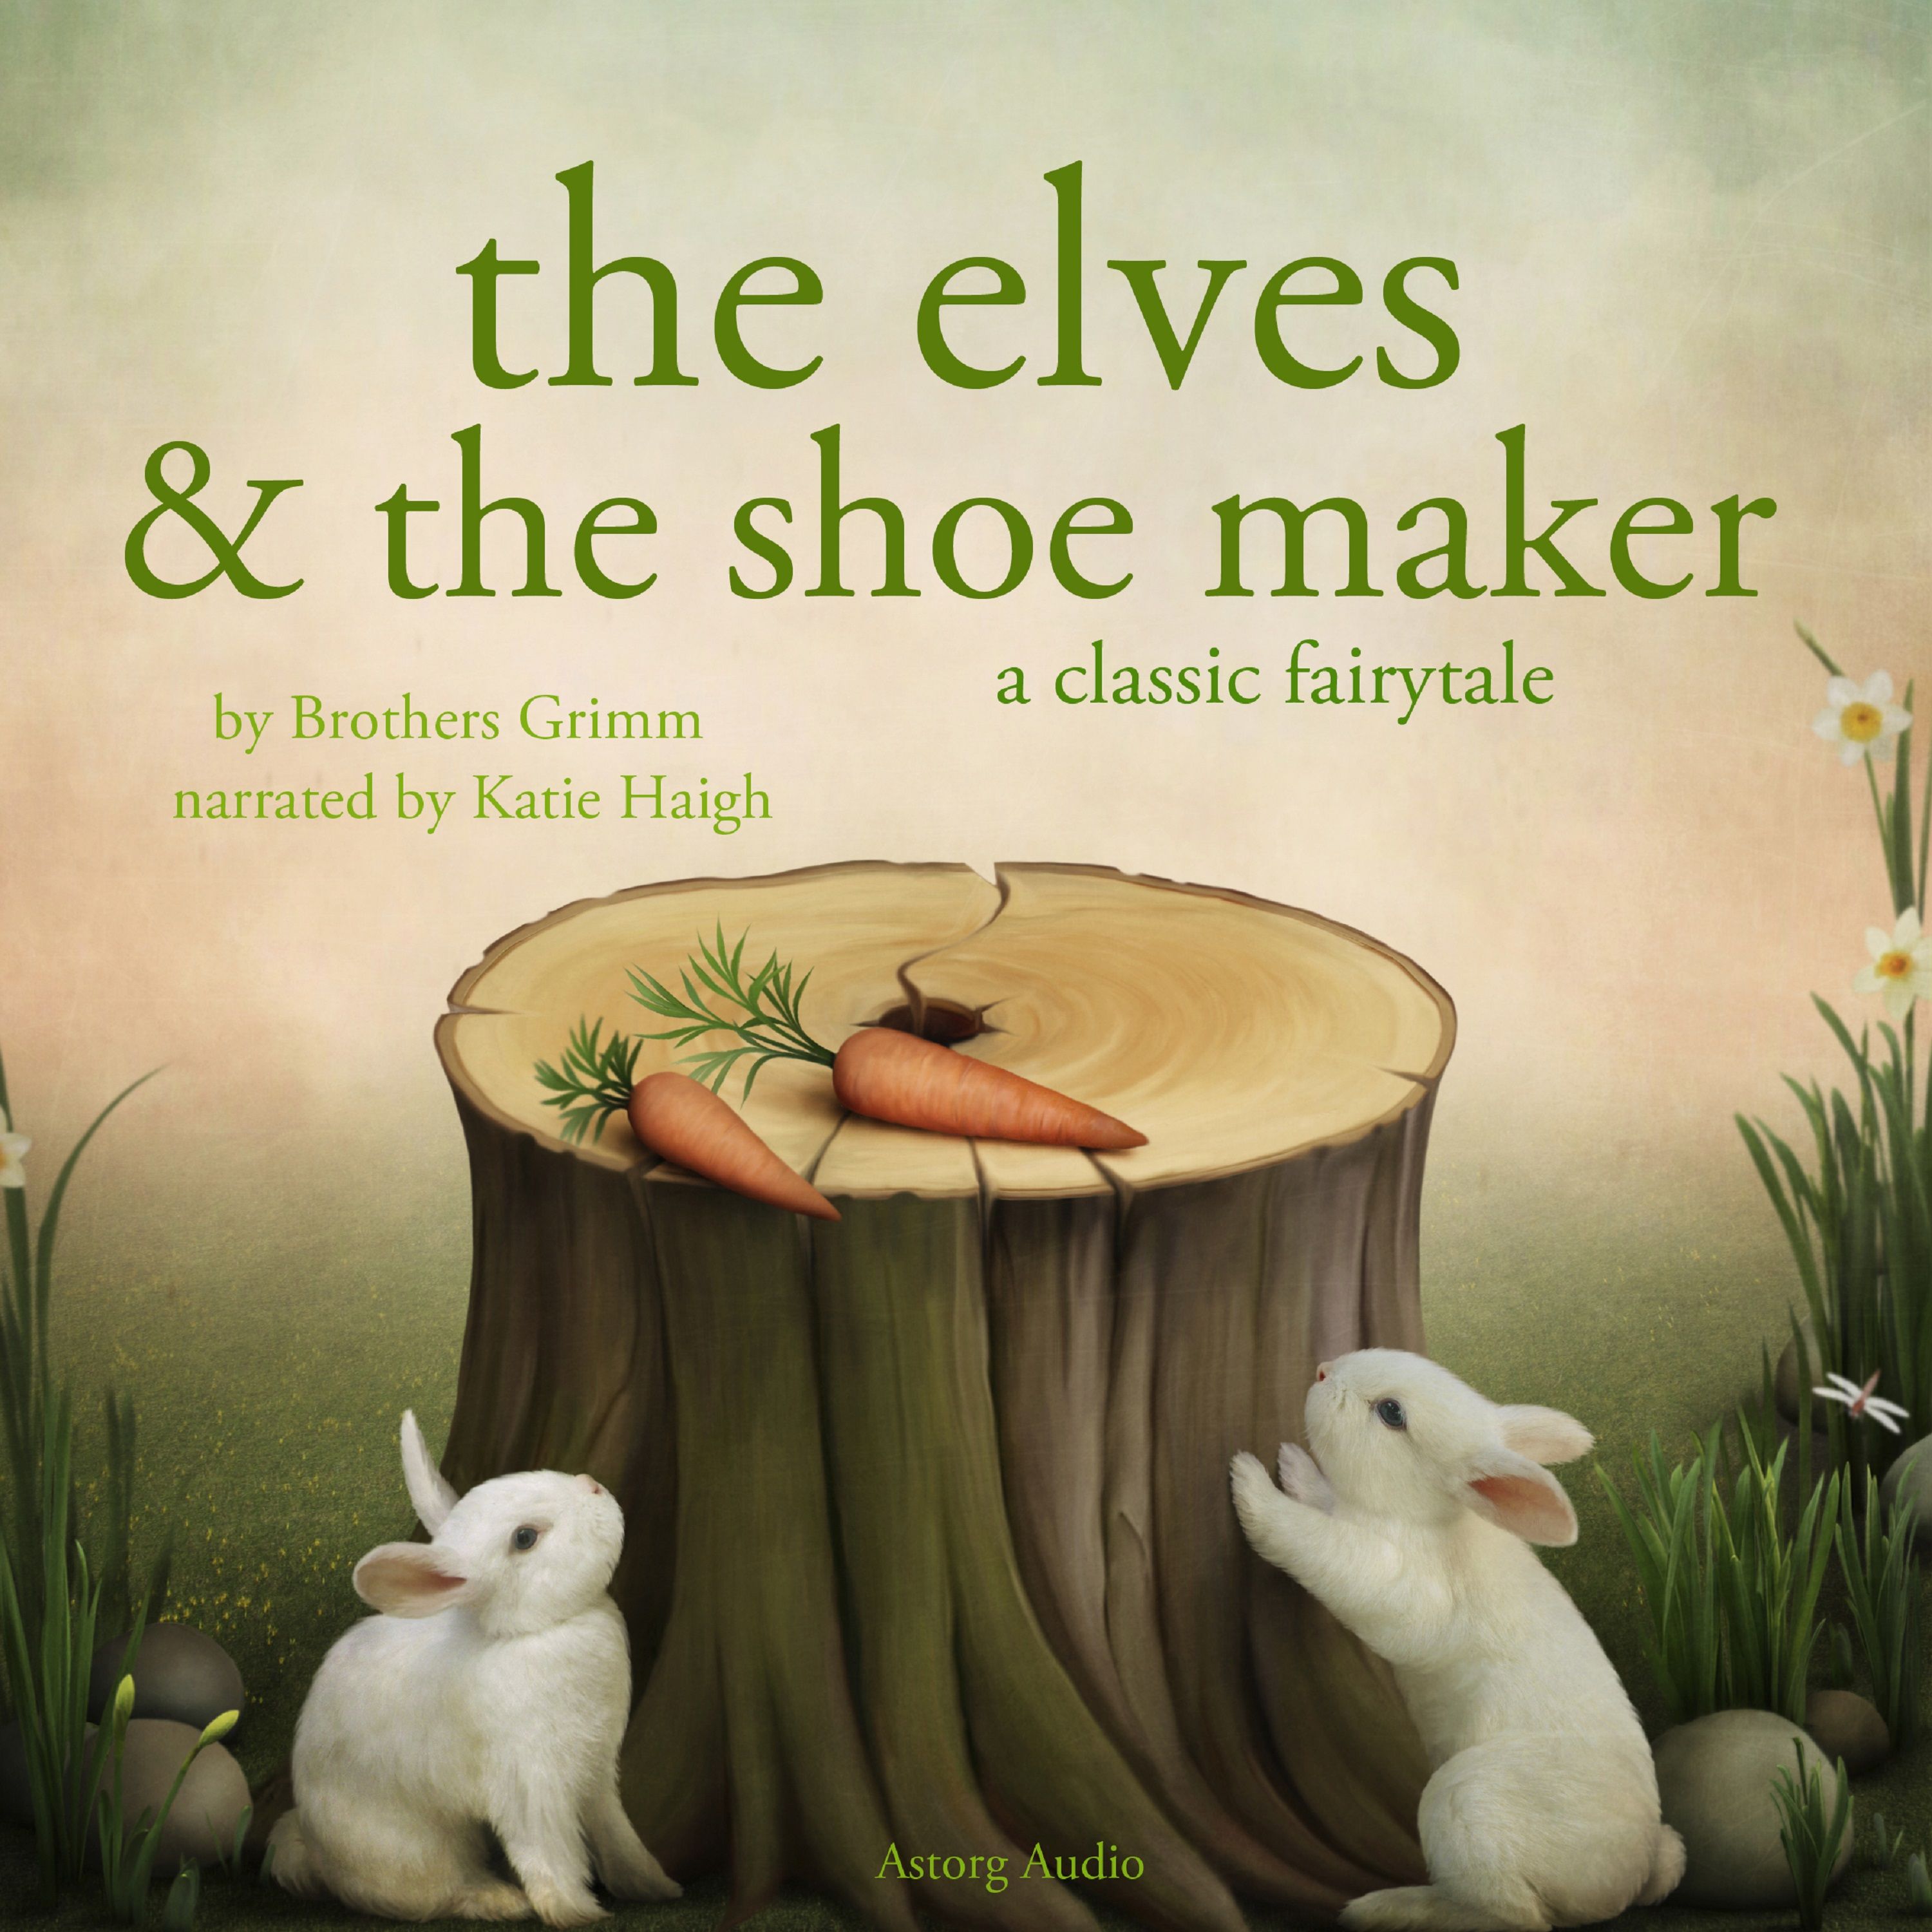 The Elves and the Shoe maker, a Fairy Tale, audiobook by Brothers Grimm